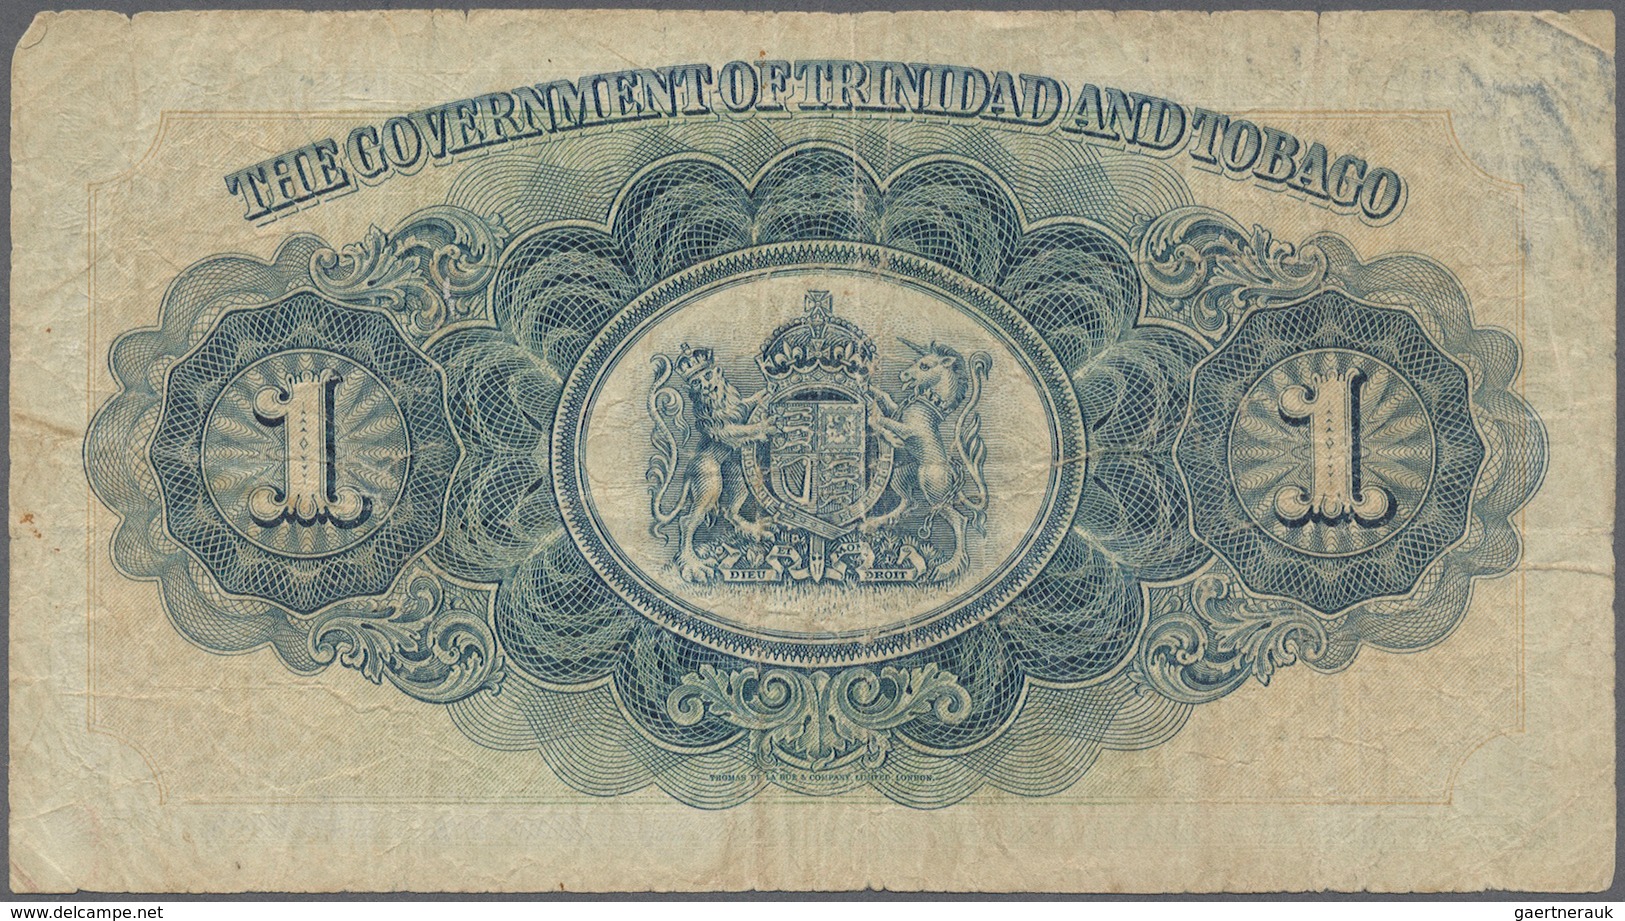 Trinidad & Tobago: 1 Dollar 1935, First Date Issue, P. 5 Used With Folds And Stain In Paper, A Pen W - Trinidad & Tobago